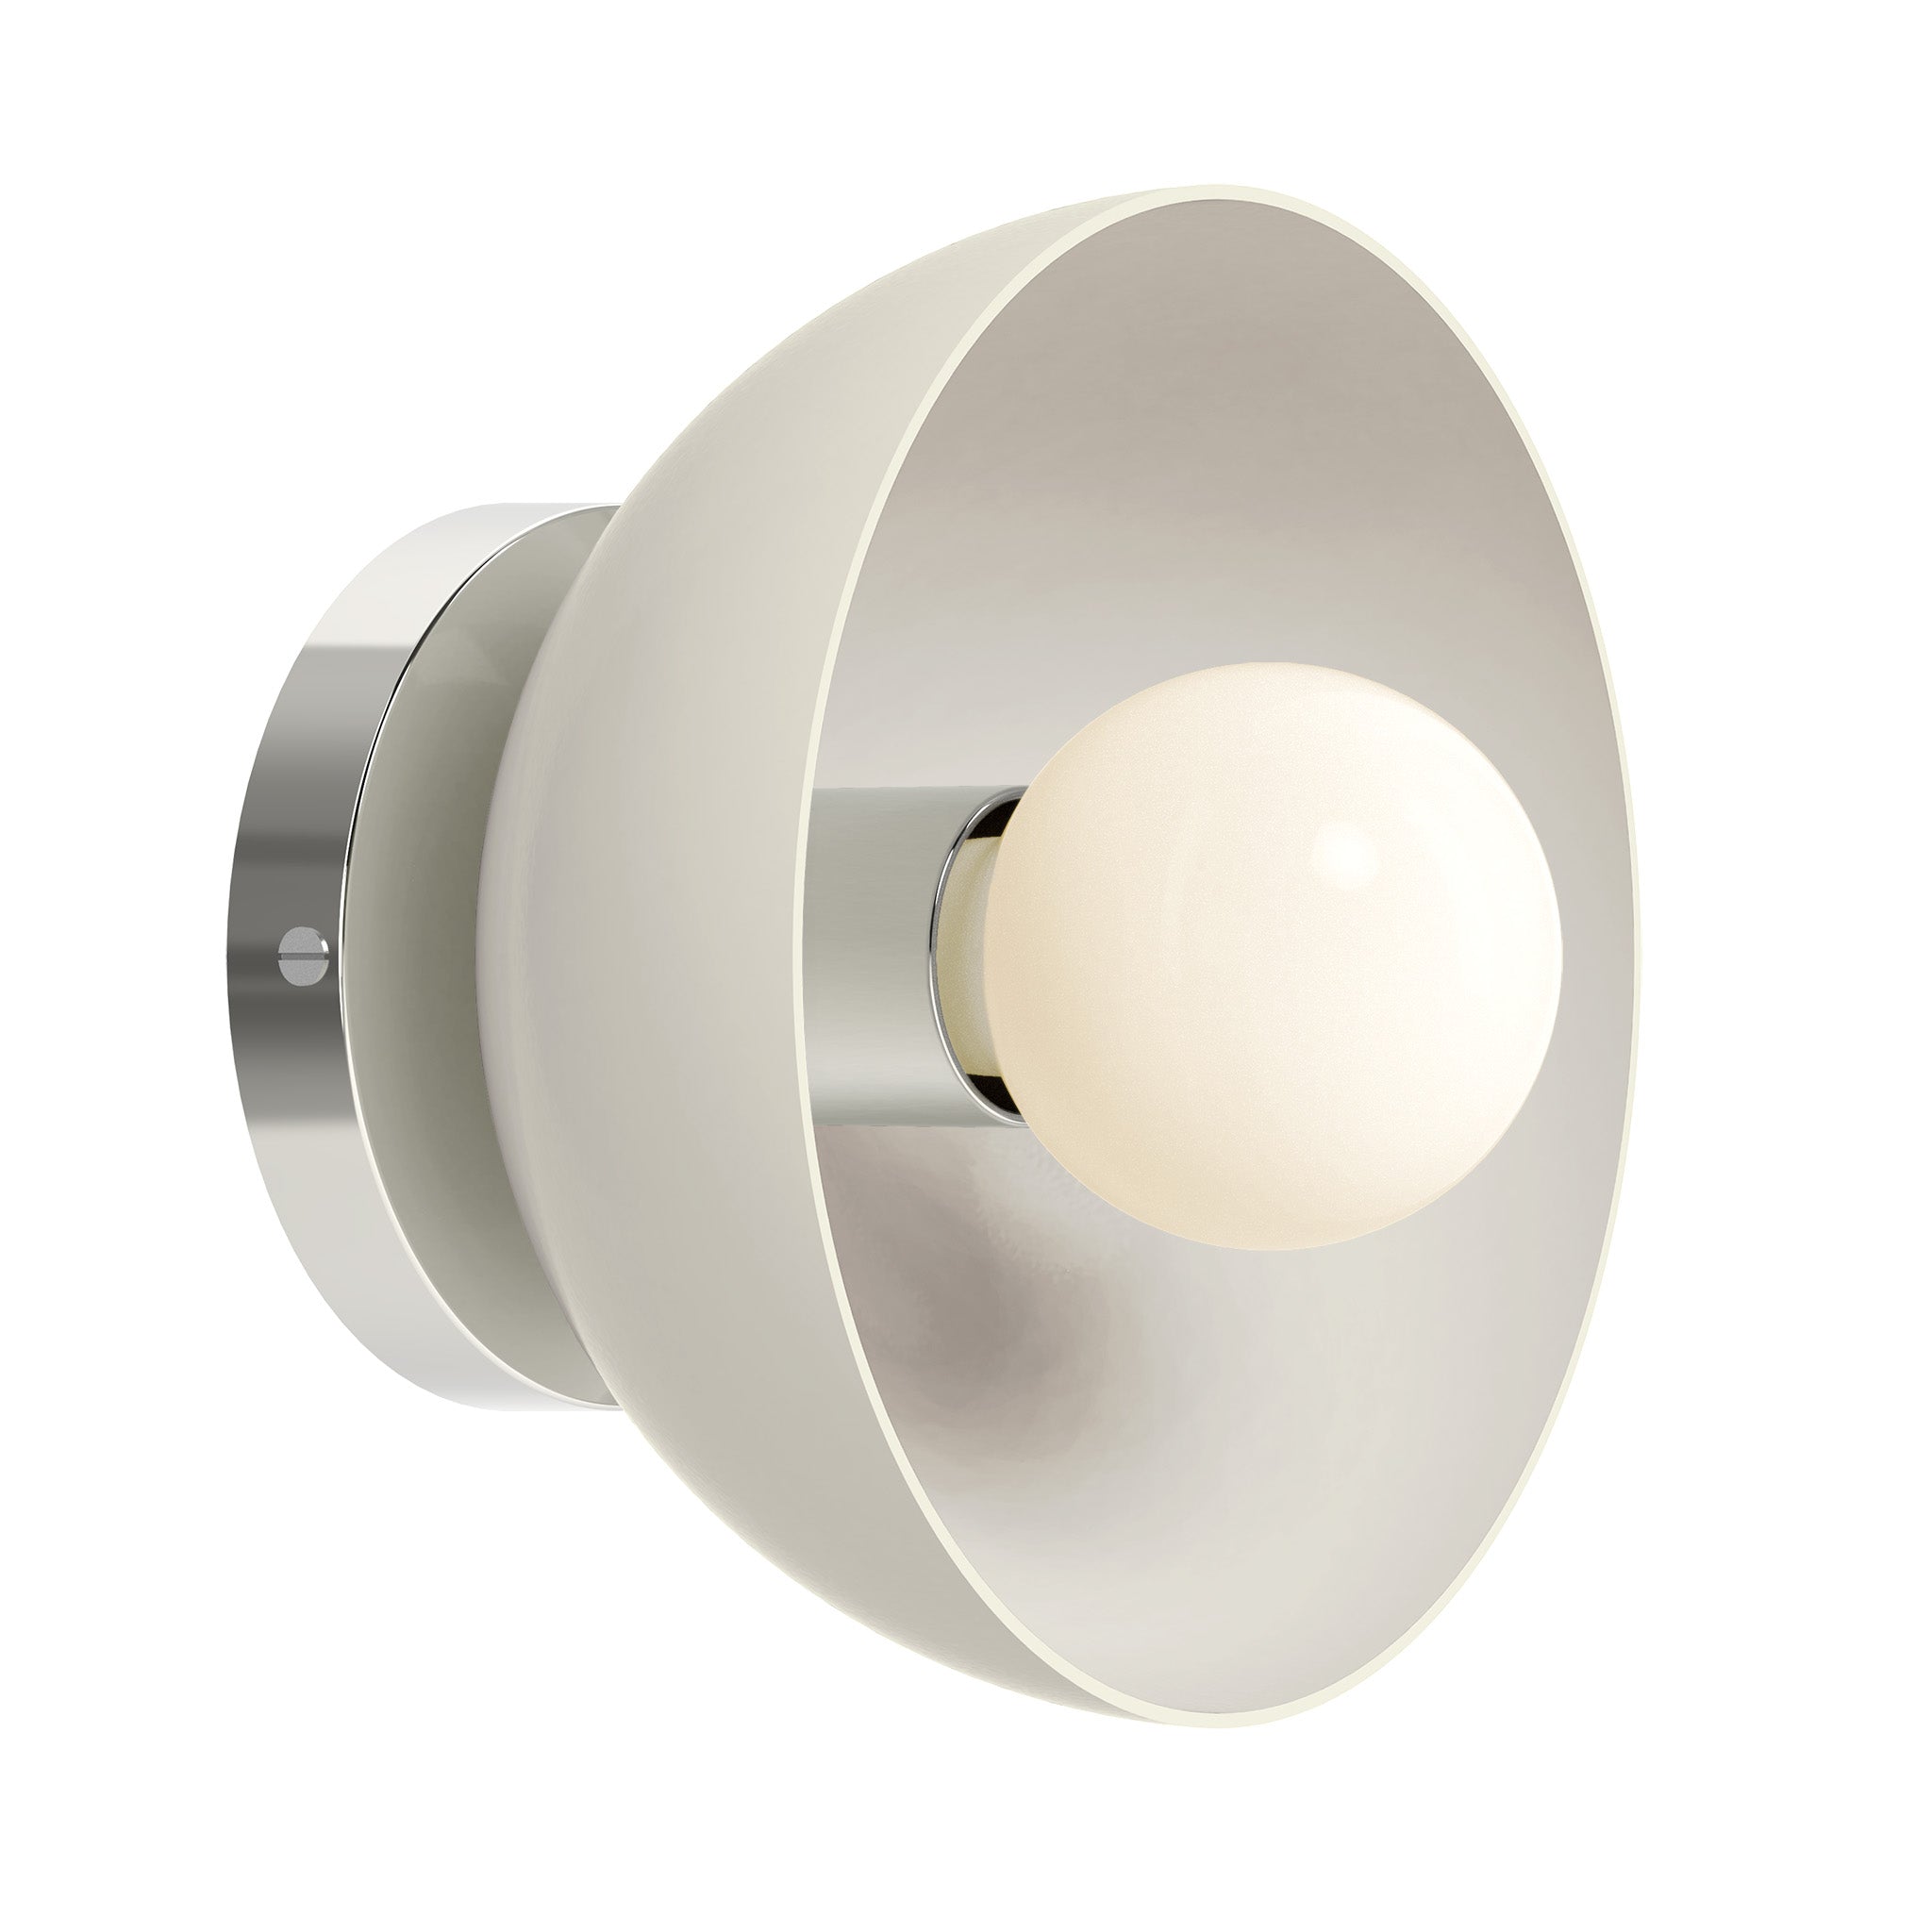 Nickel and chalk color Hemi sconce 8" Dutton Brown lighting